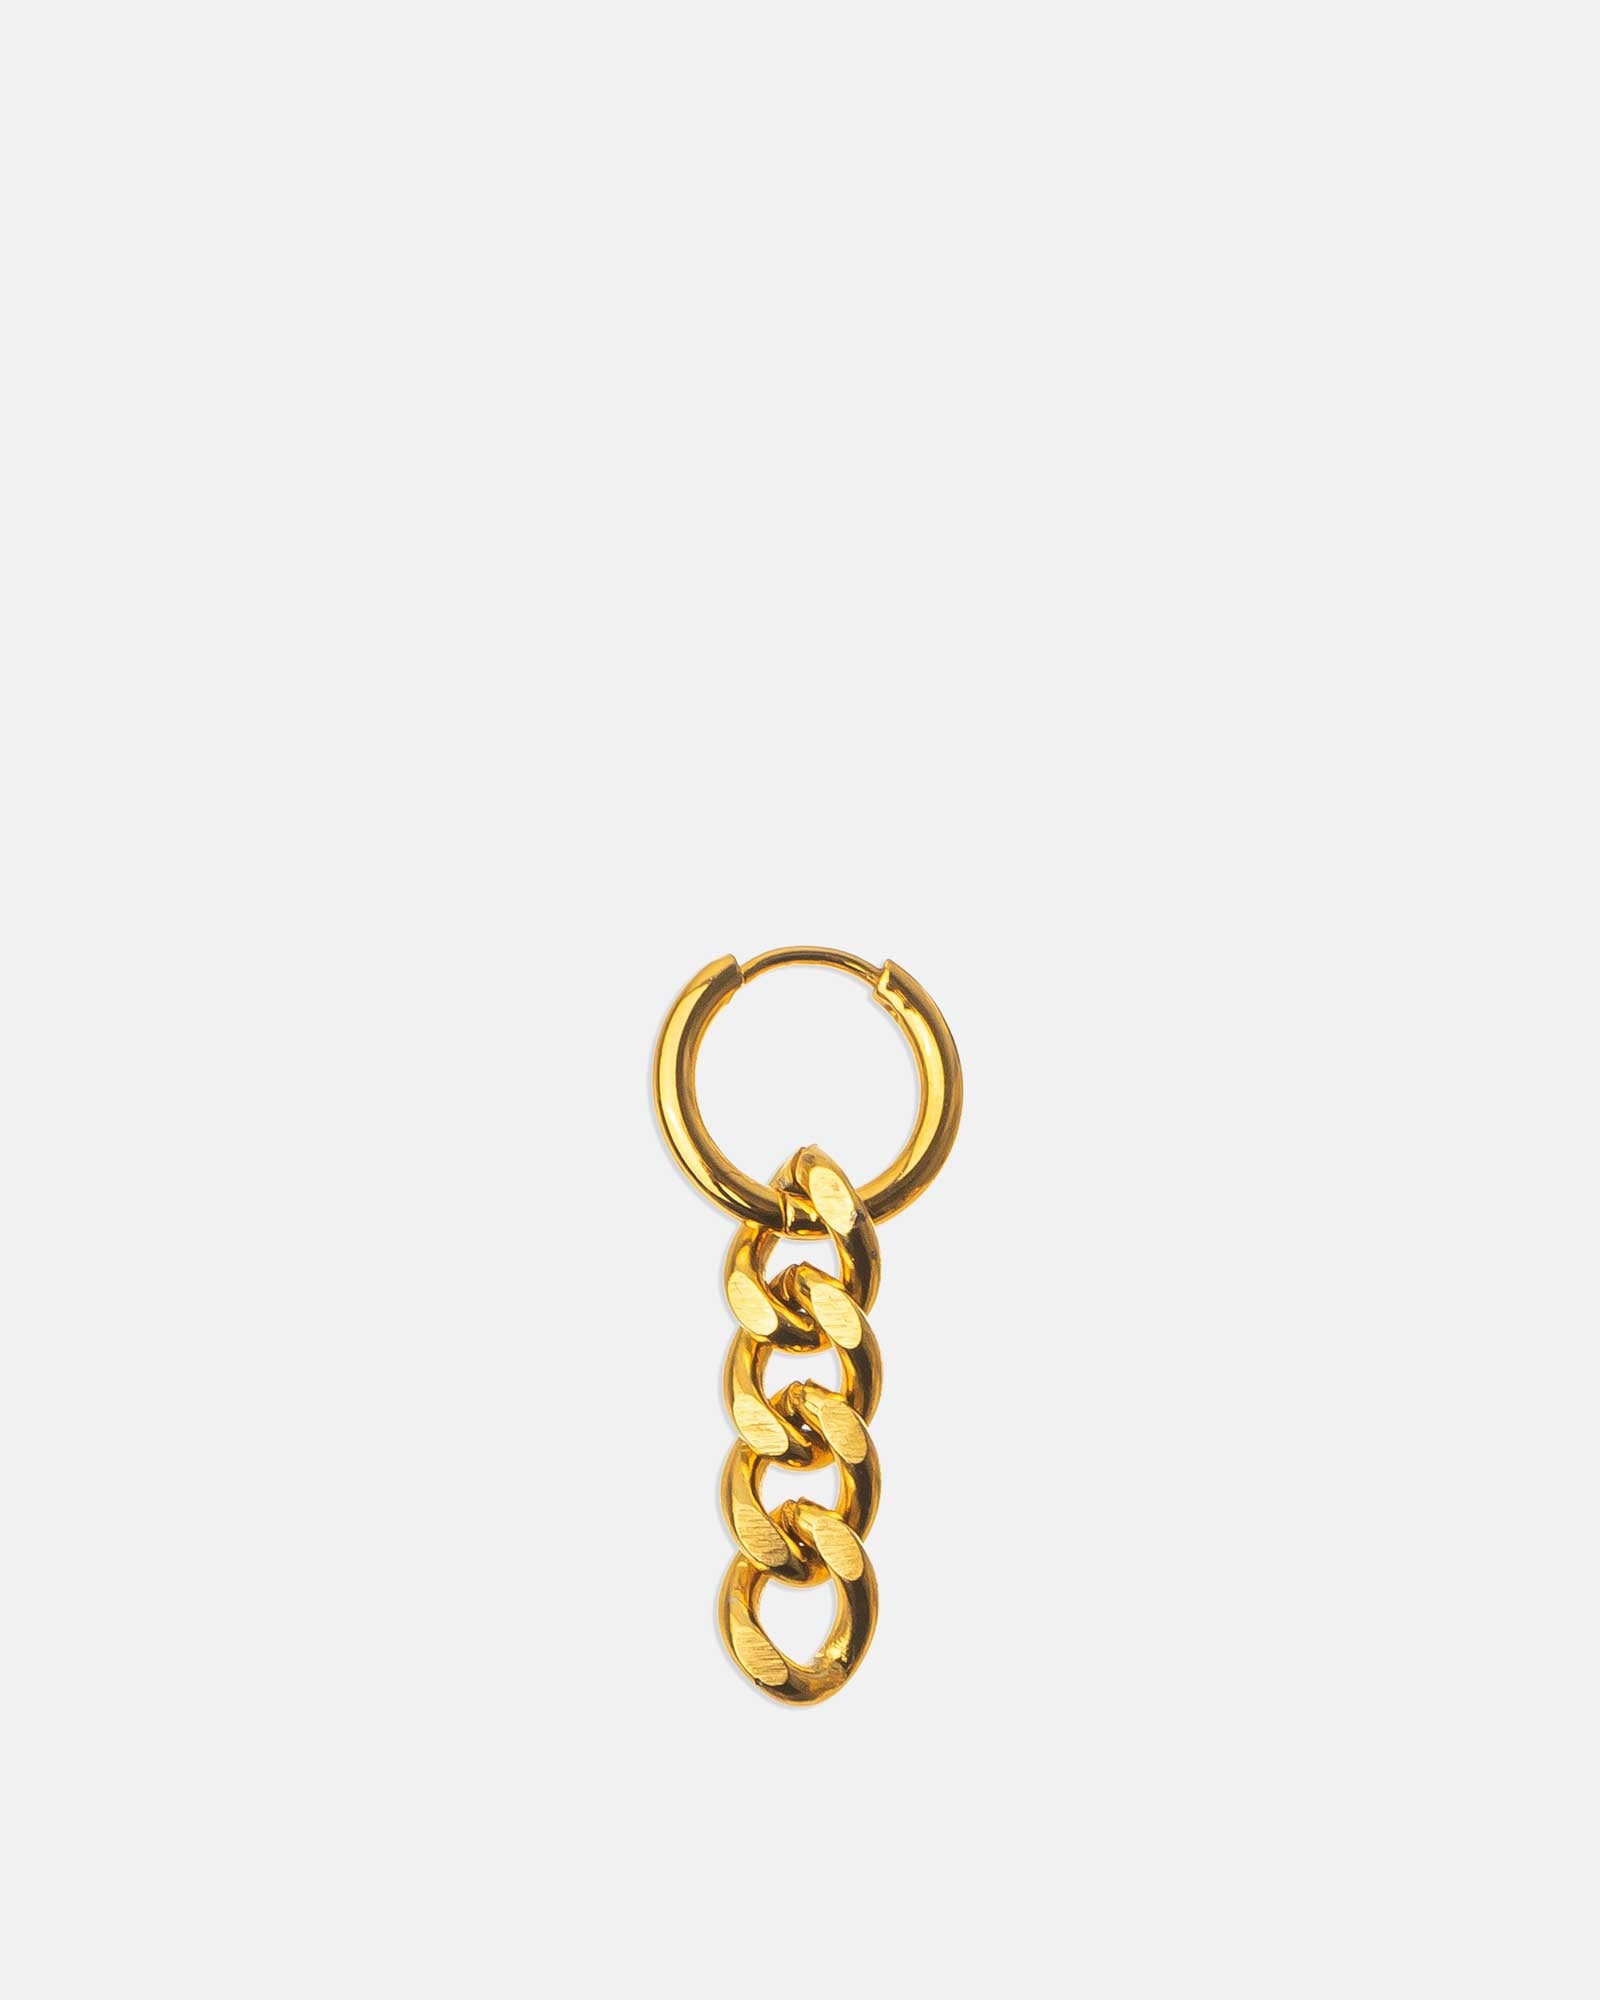 Chain Earring - Golden Stainless Steel - Online Jewelry - Dicci